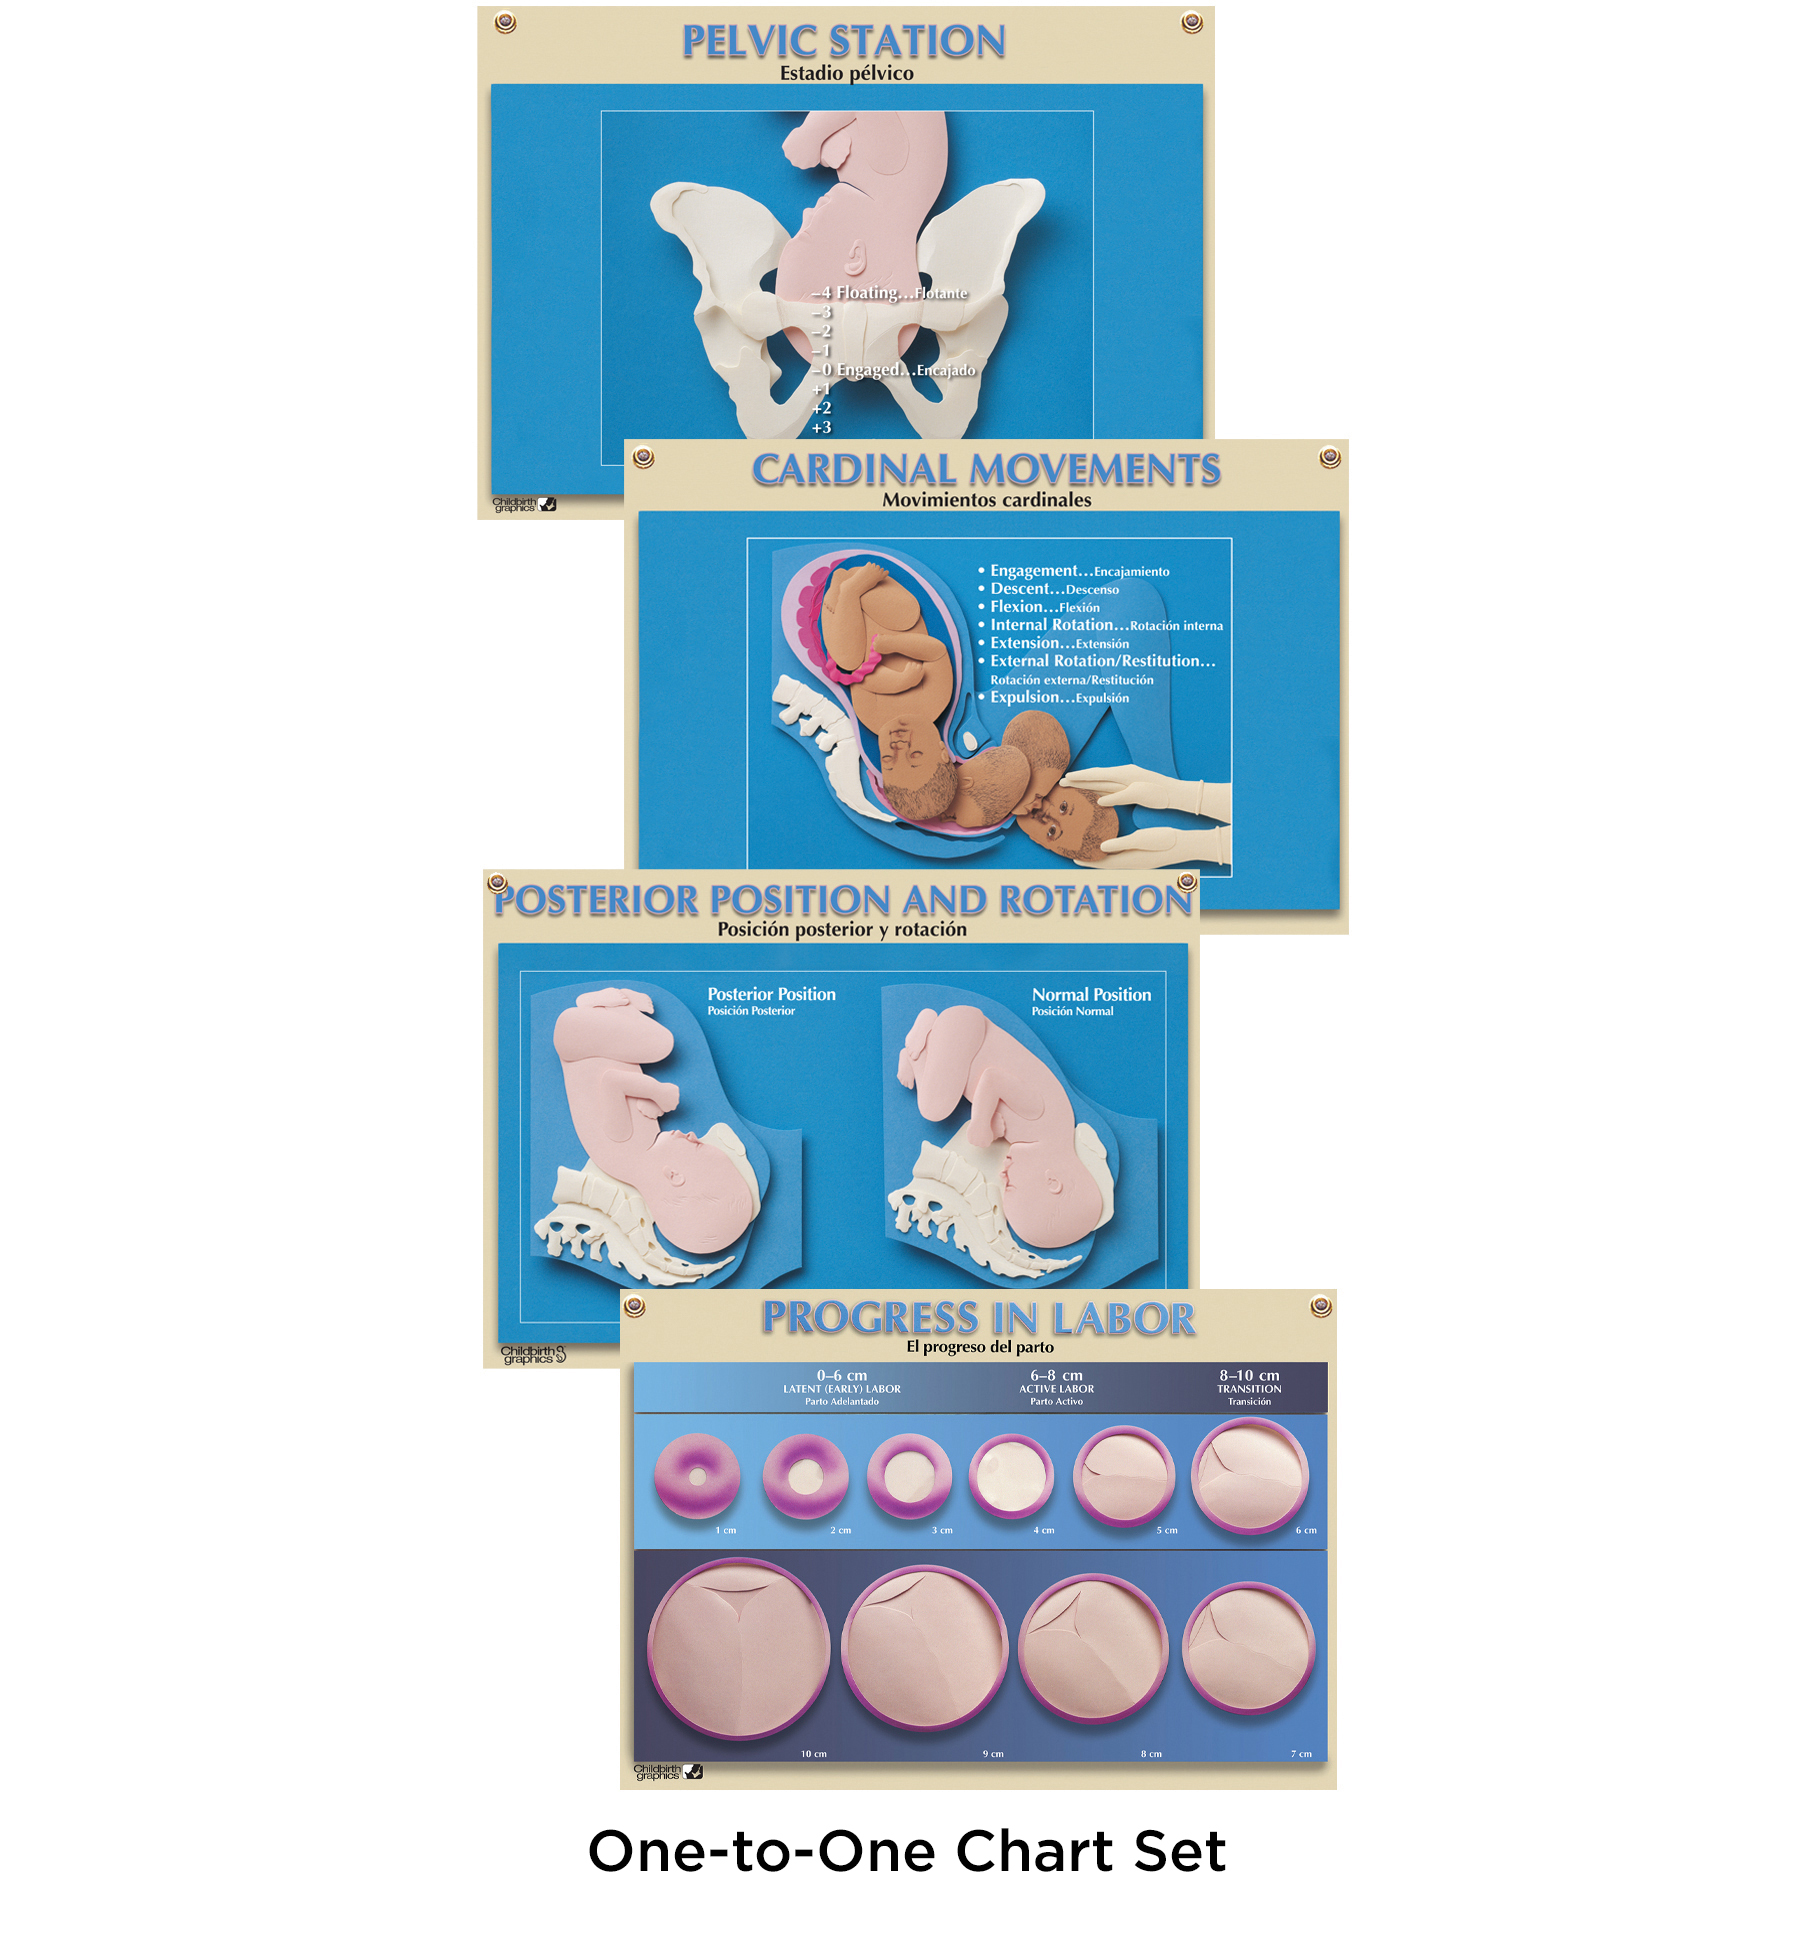 One-to-One Chart Set for childbirth education from Childbirth Graphics, 90629